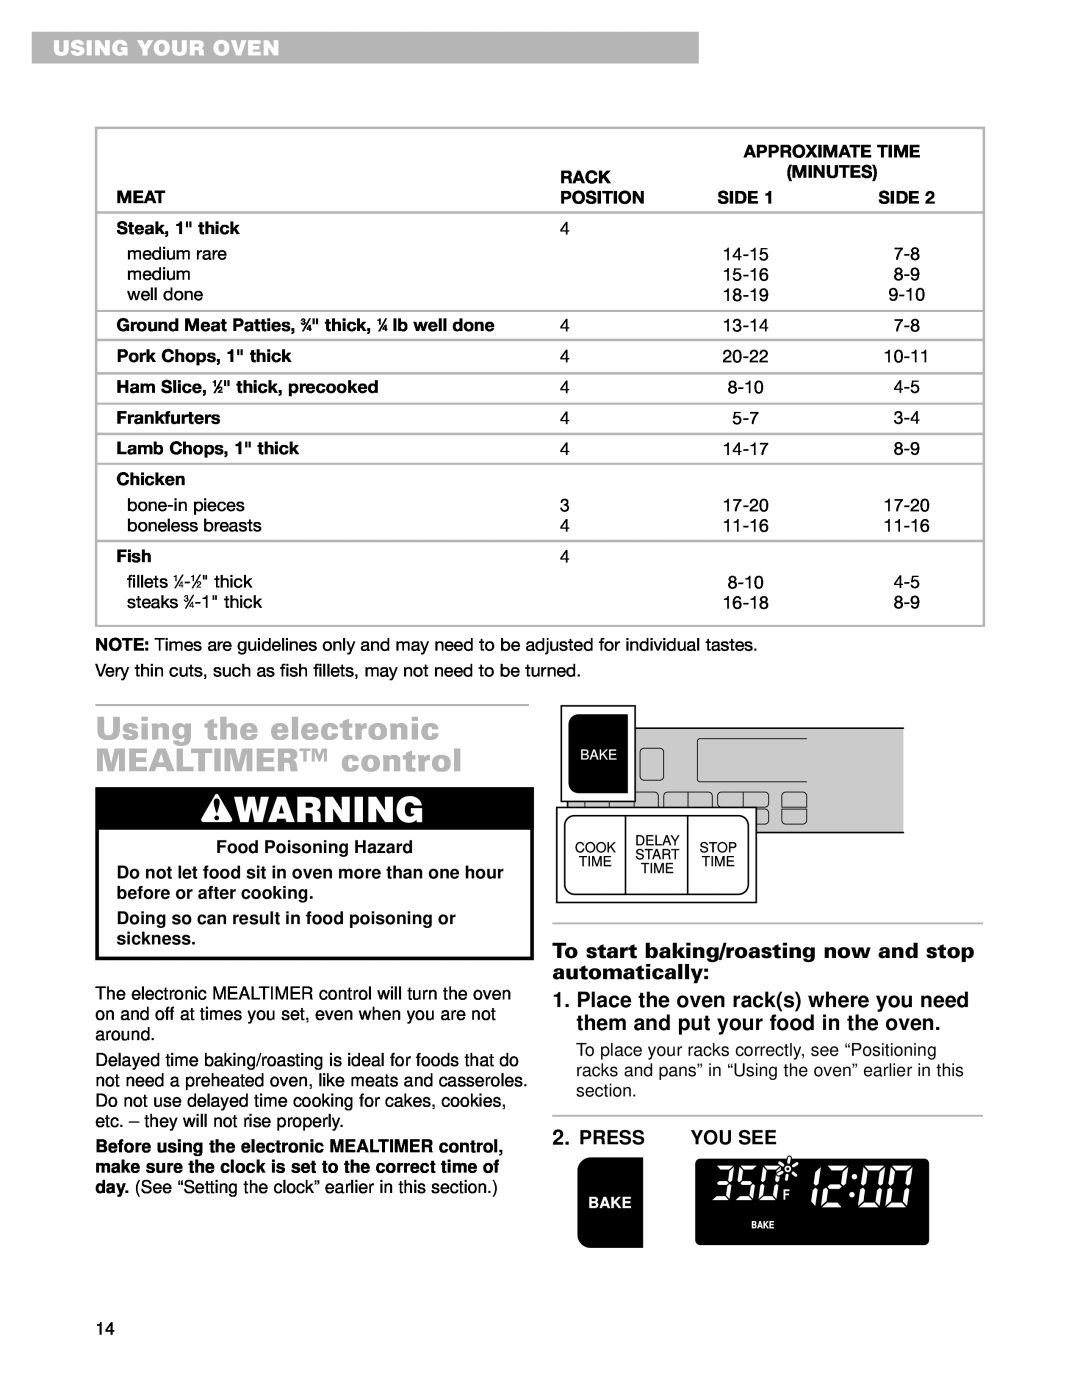 Whirlpool RMC275PD wWARNING, Using the electronic MEALTIMER control, To start baking/roasting now and stop automatically 